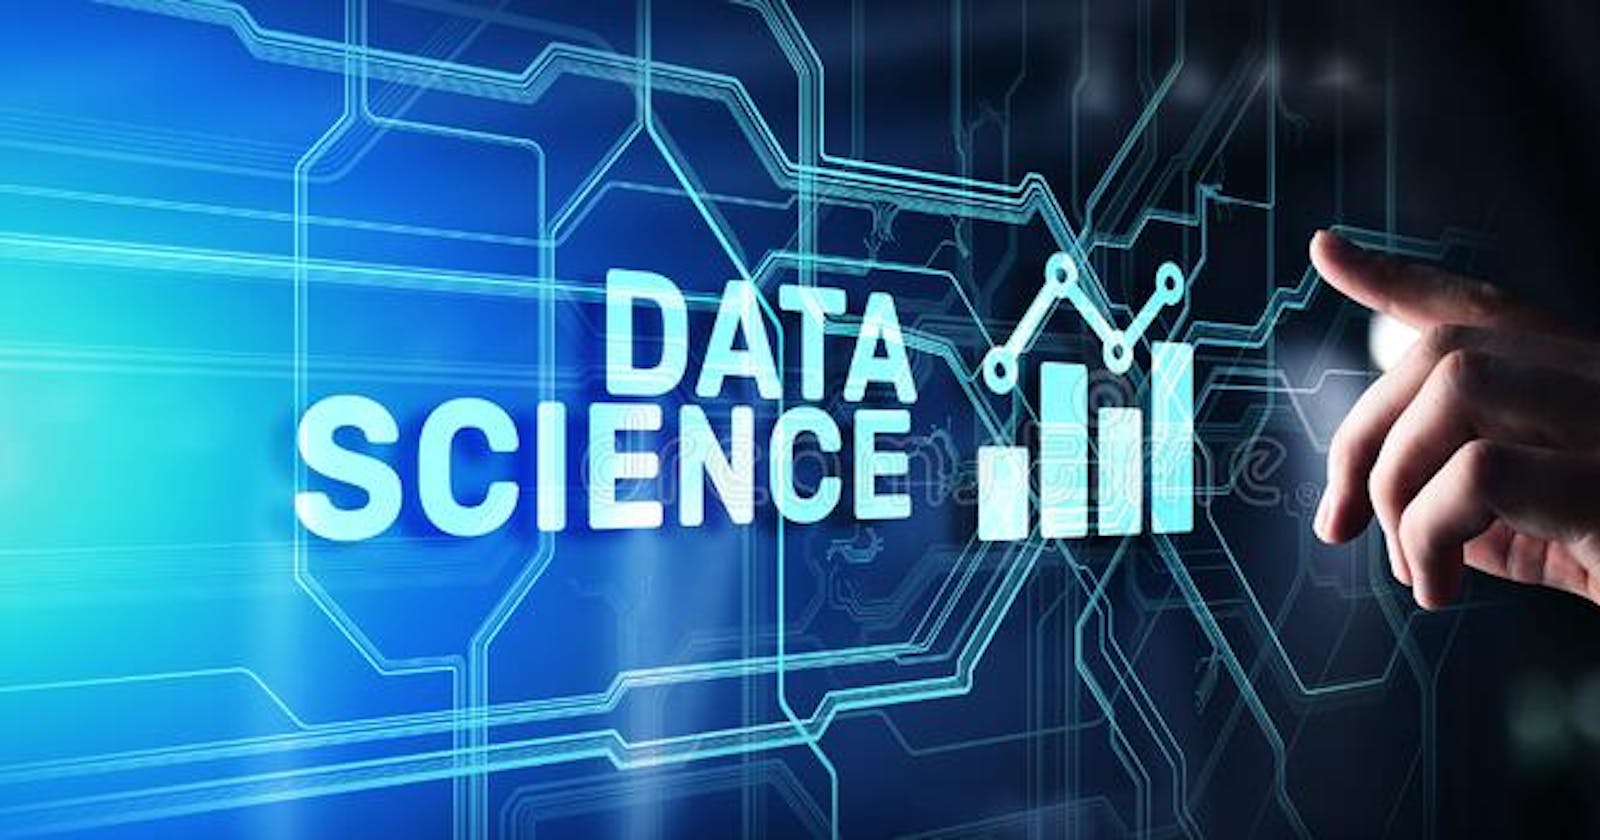 Use Cases of Data Science in Astronomy,  Fintech, Healthcare, Marketing, Transport, and Logistics.